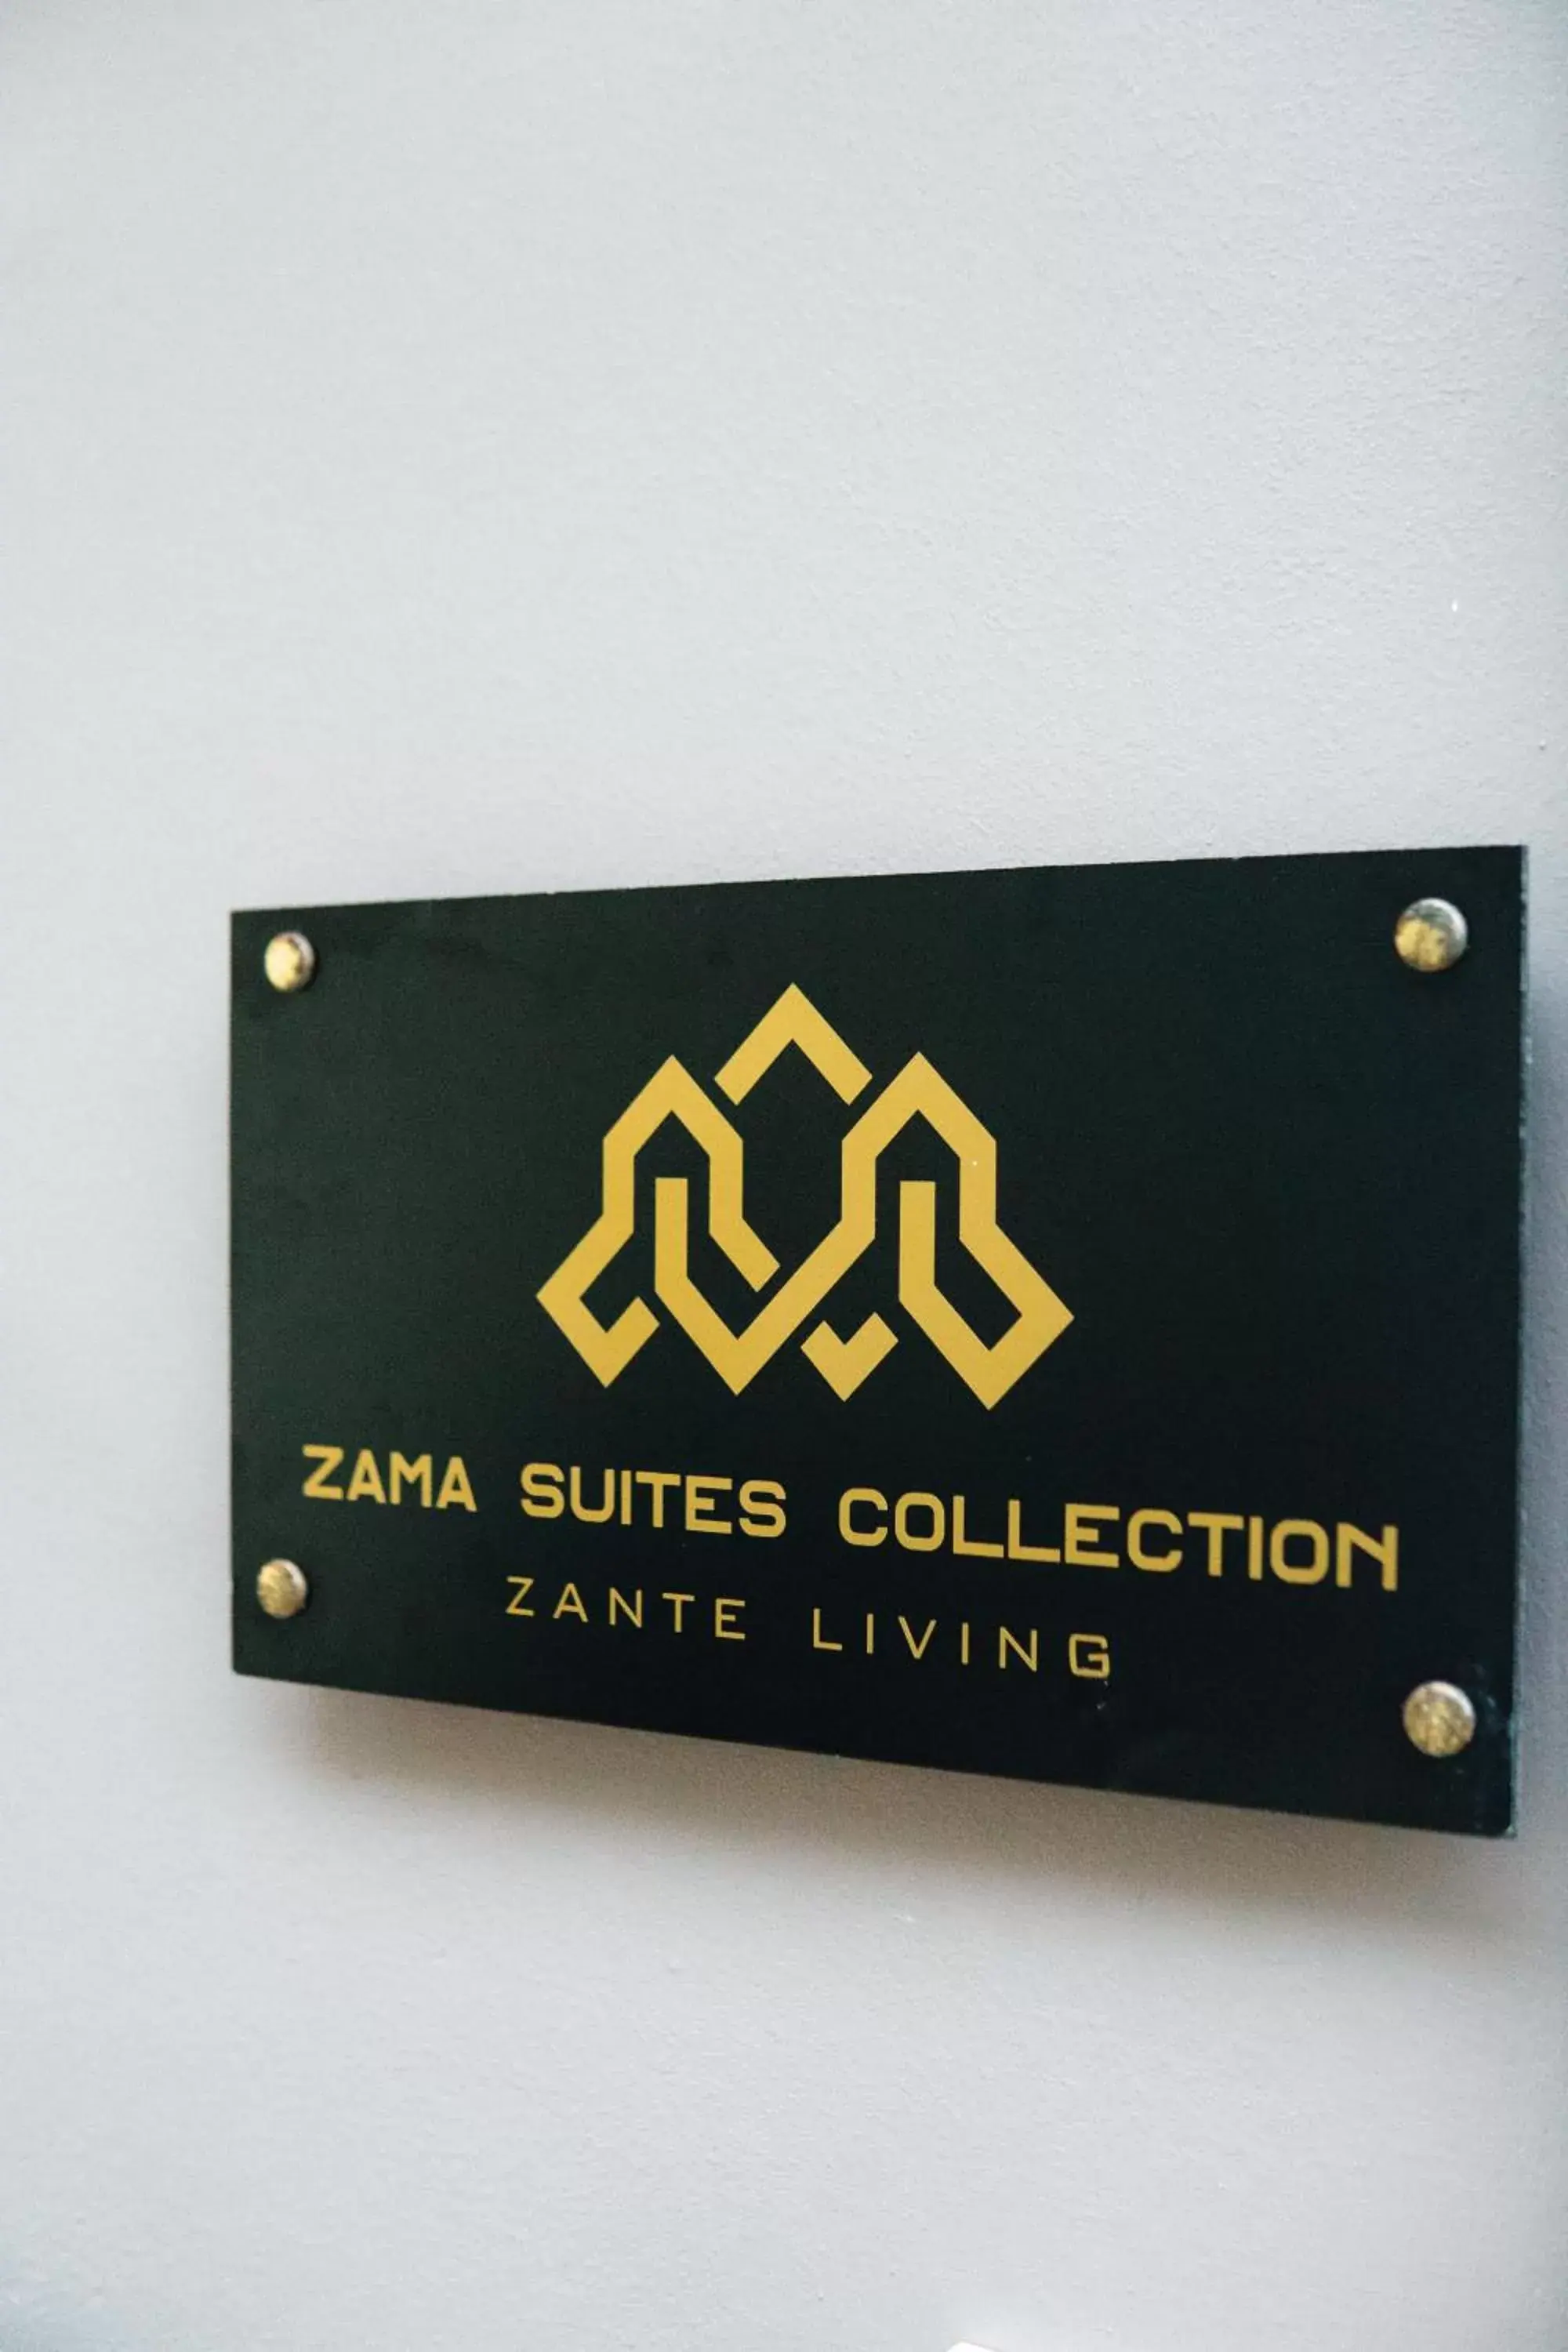 Property logo or sign in Zama Suites Collection